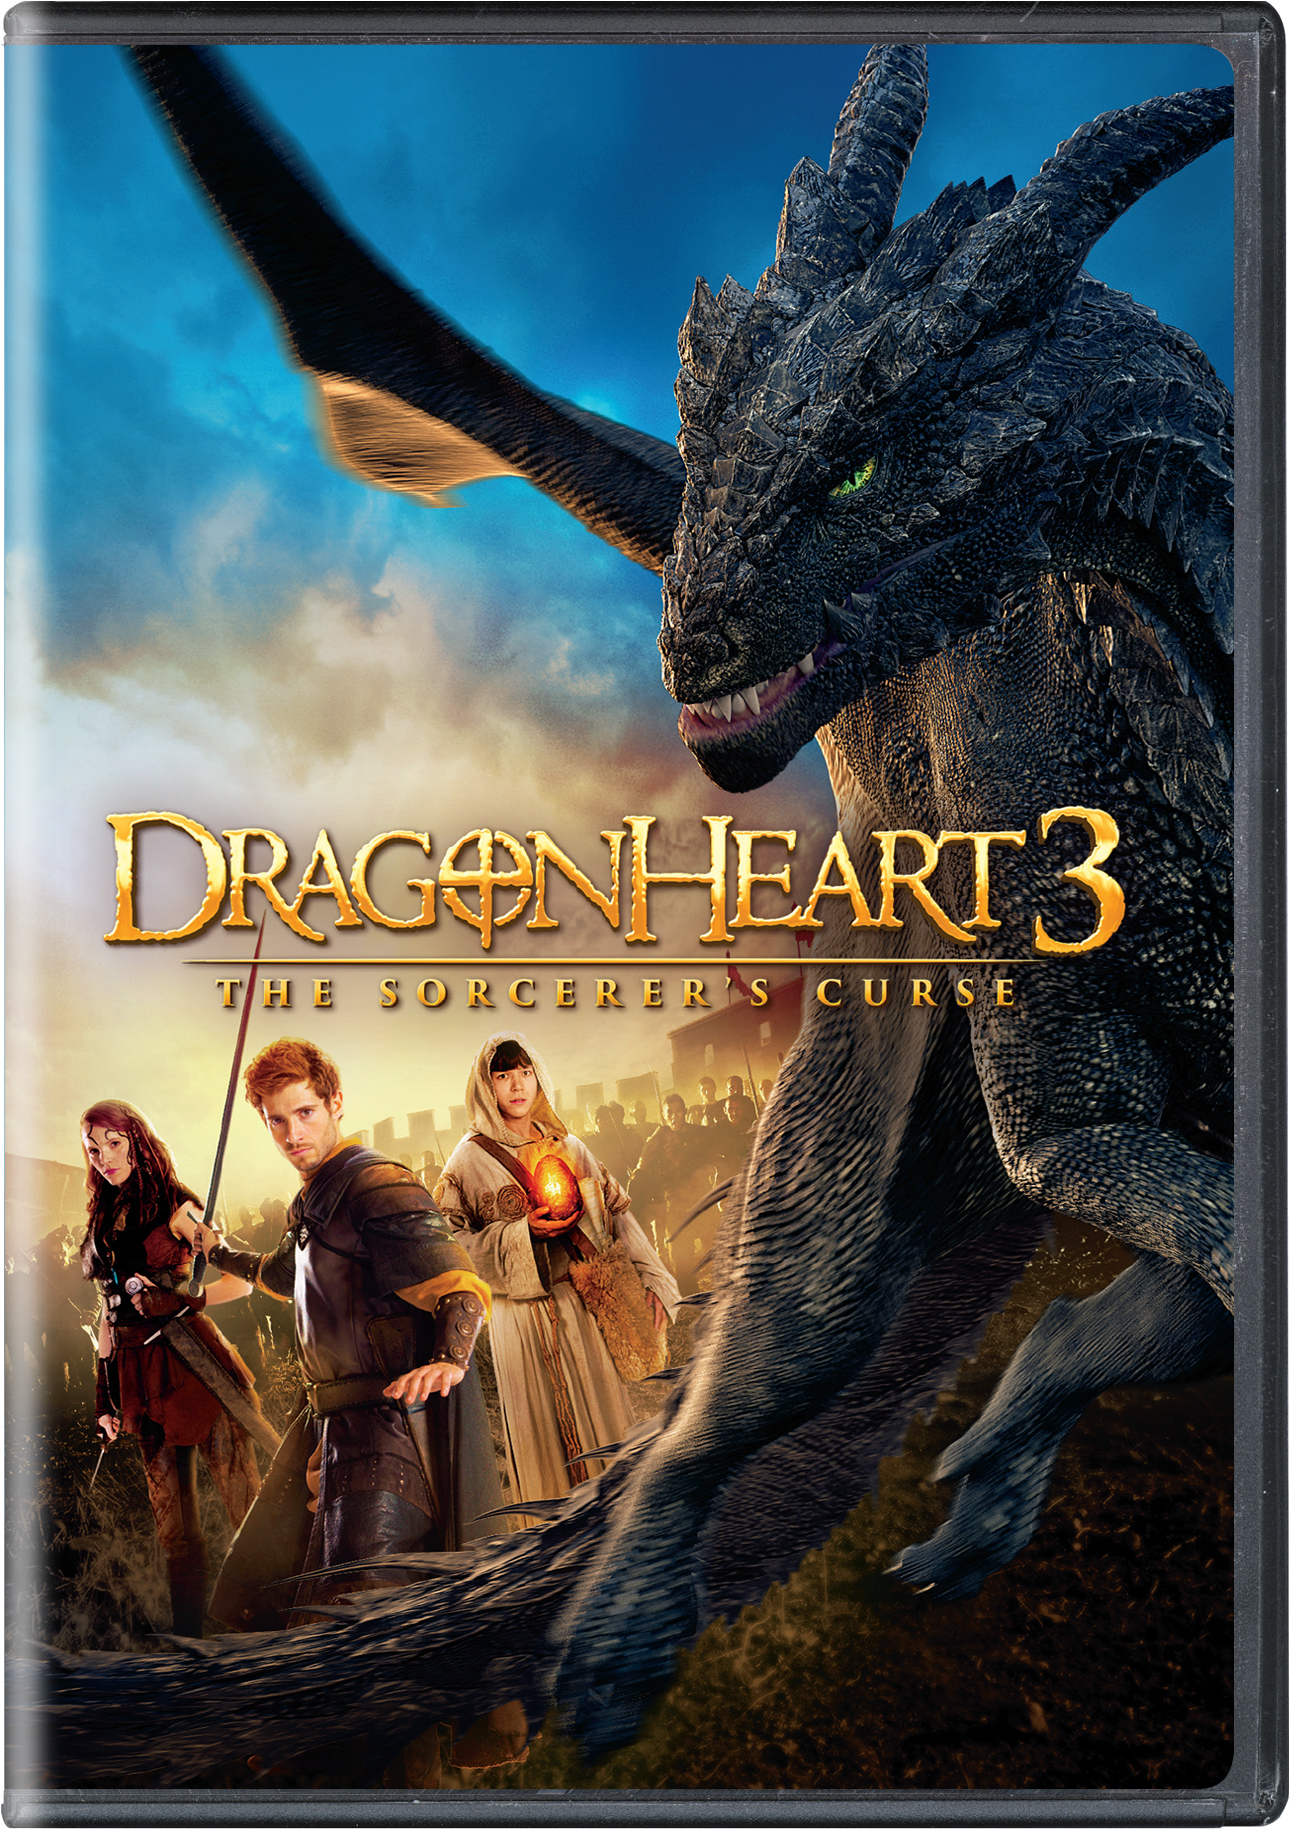 Dragonheart 3 - The Sorcerer's Curse - DVD [ 2015 ]  - Adventure Movies On DVD - Movies On GRUV